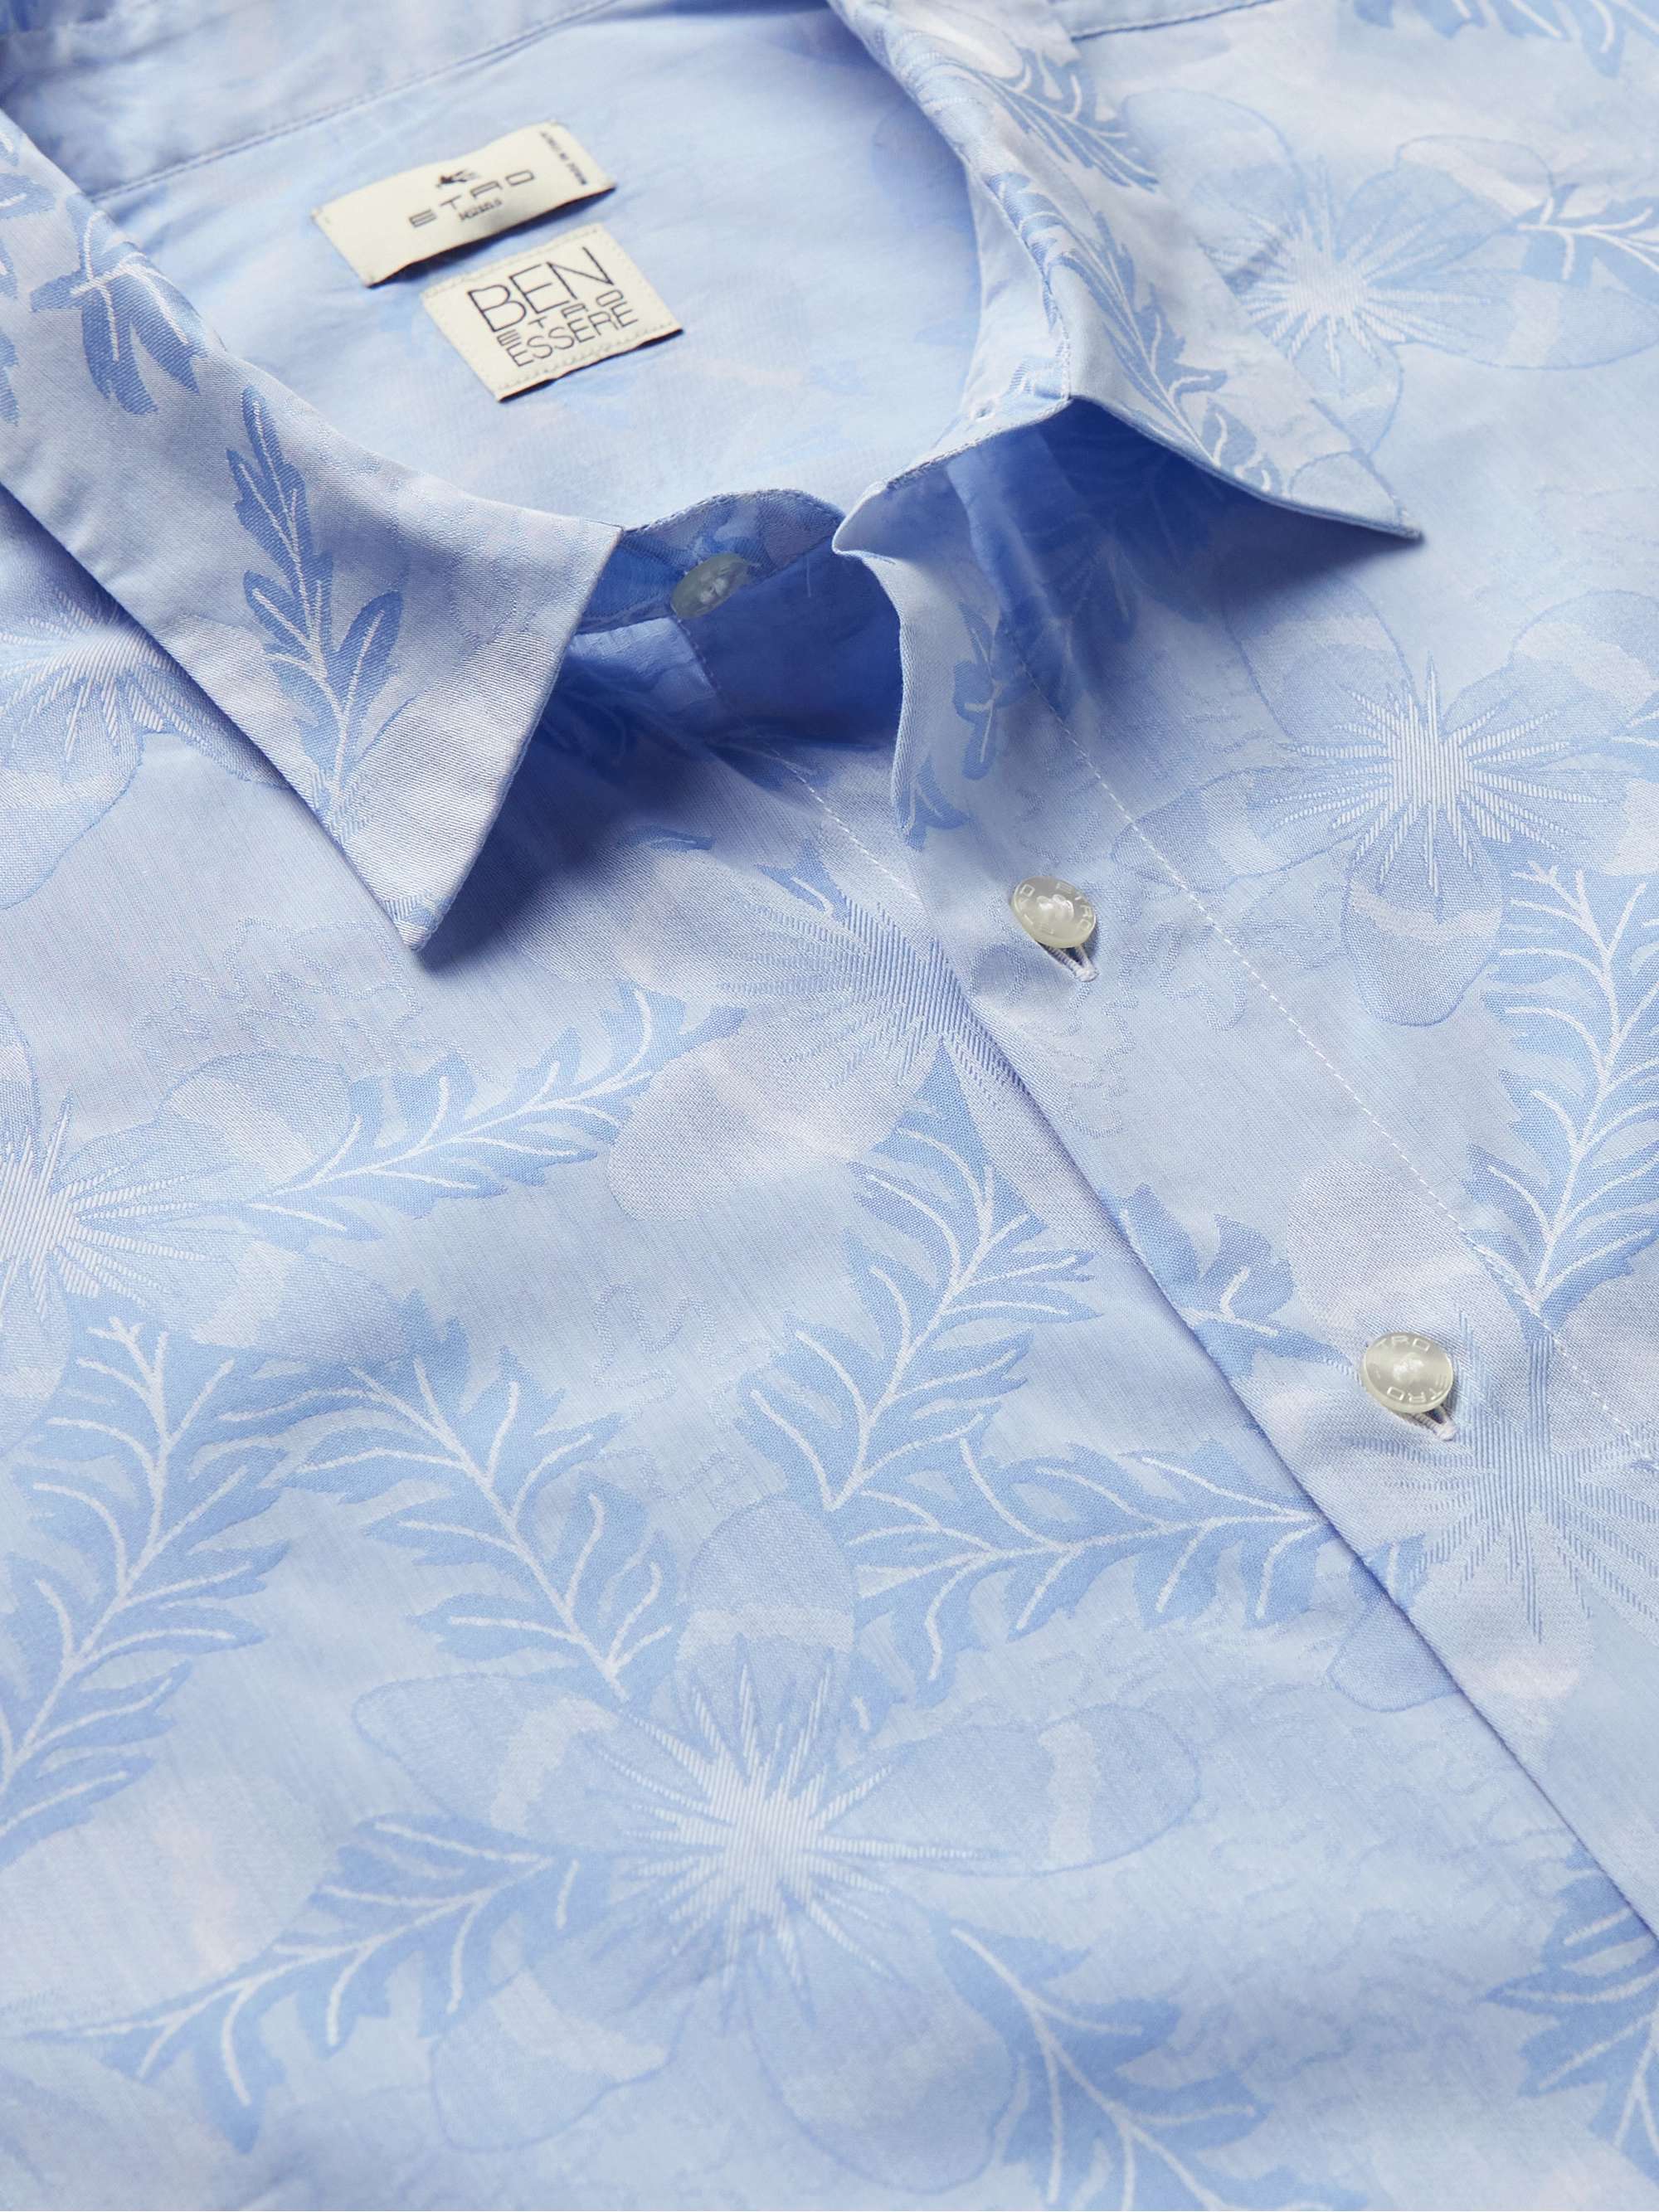 ETRO Floral-Jacquard Cotton and Lyocell-Blend Shirt